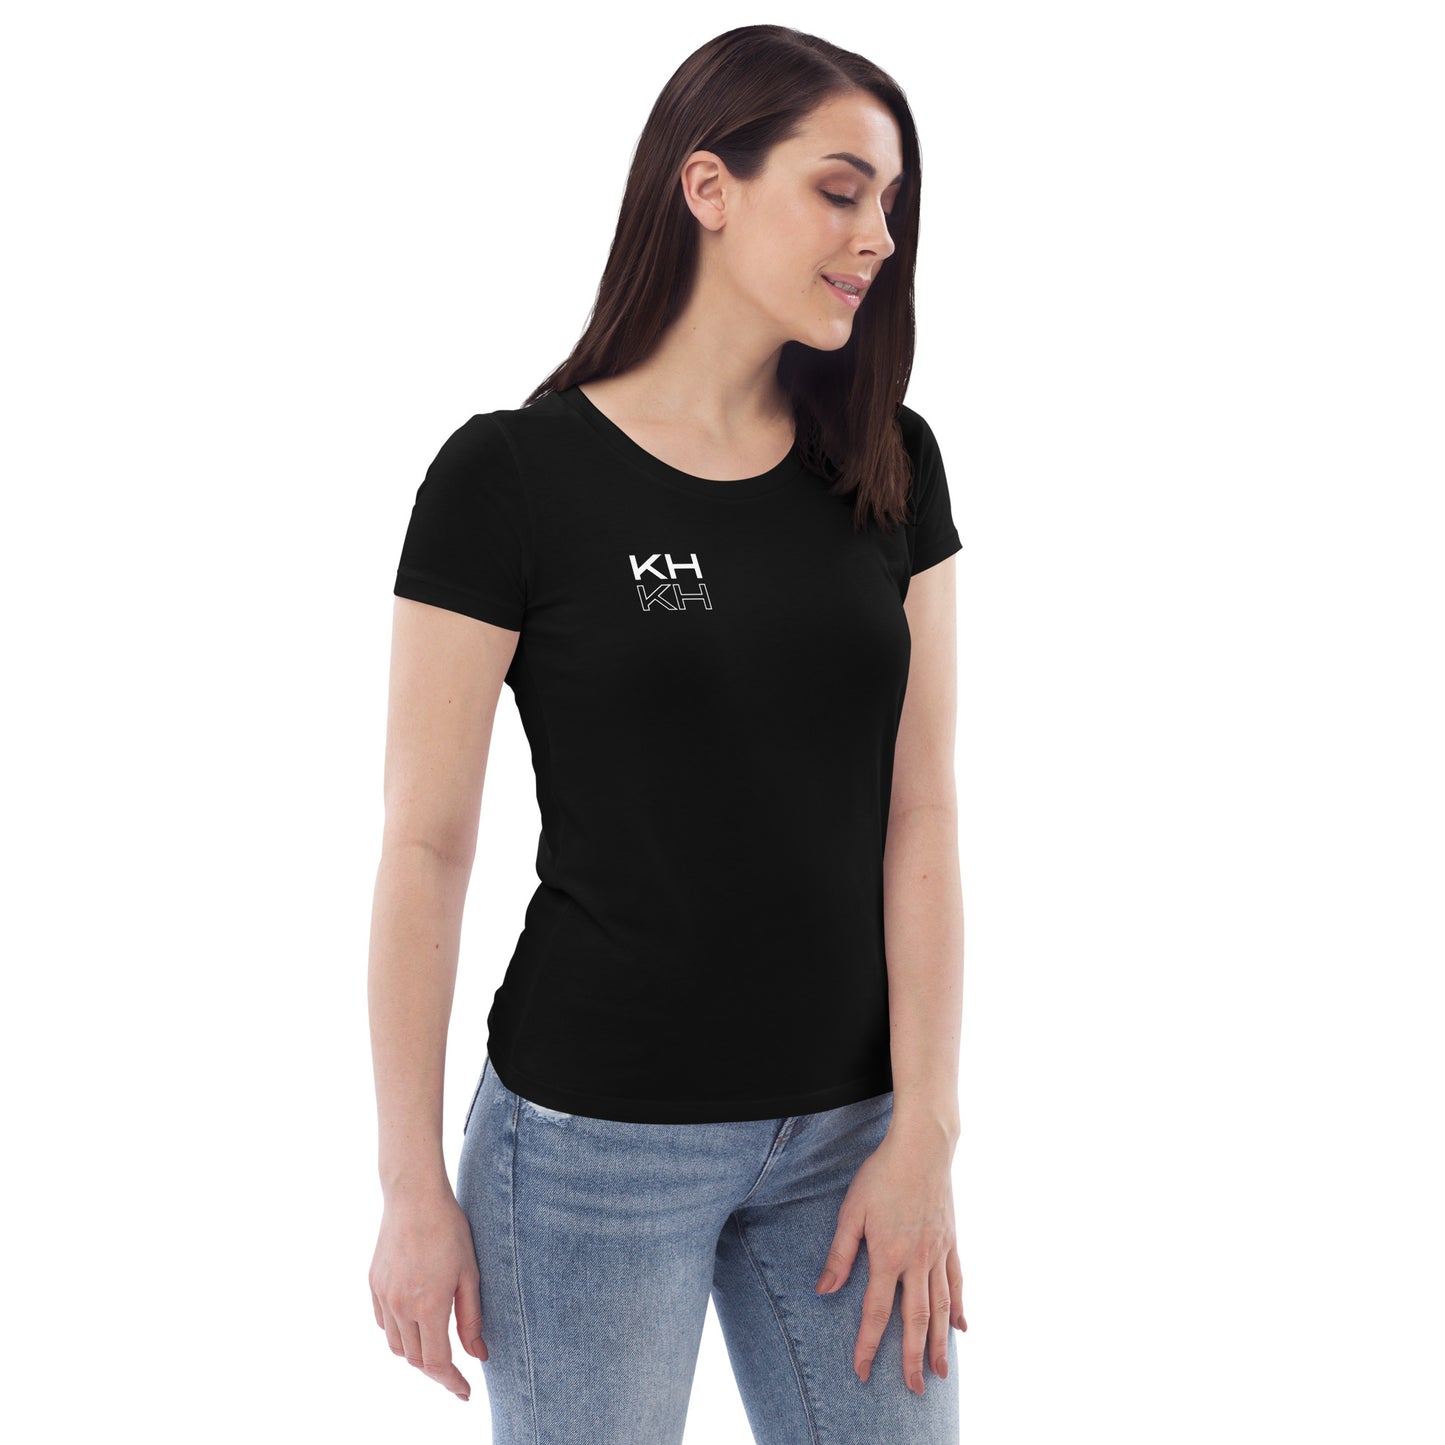 KH Women's Fitted Tee